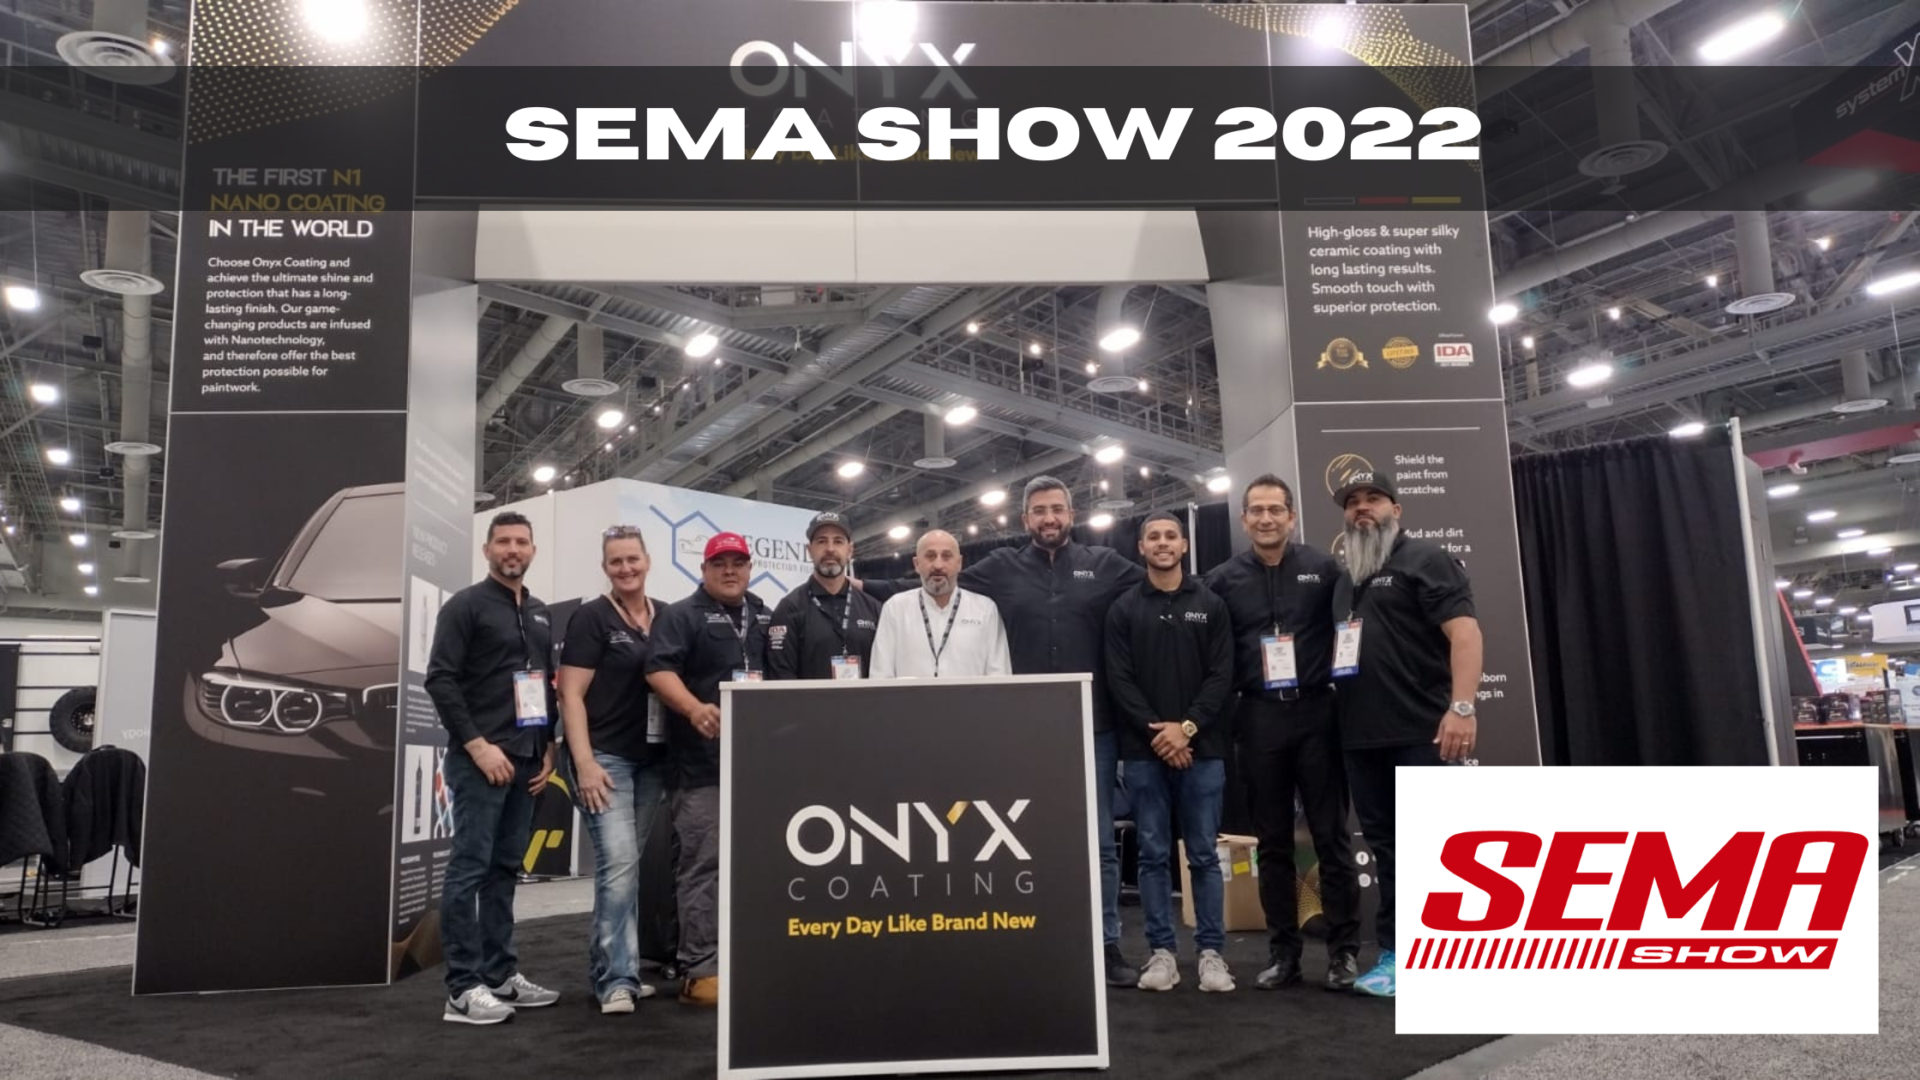 ONYX COATINGs attends the Sema show 2022